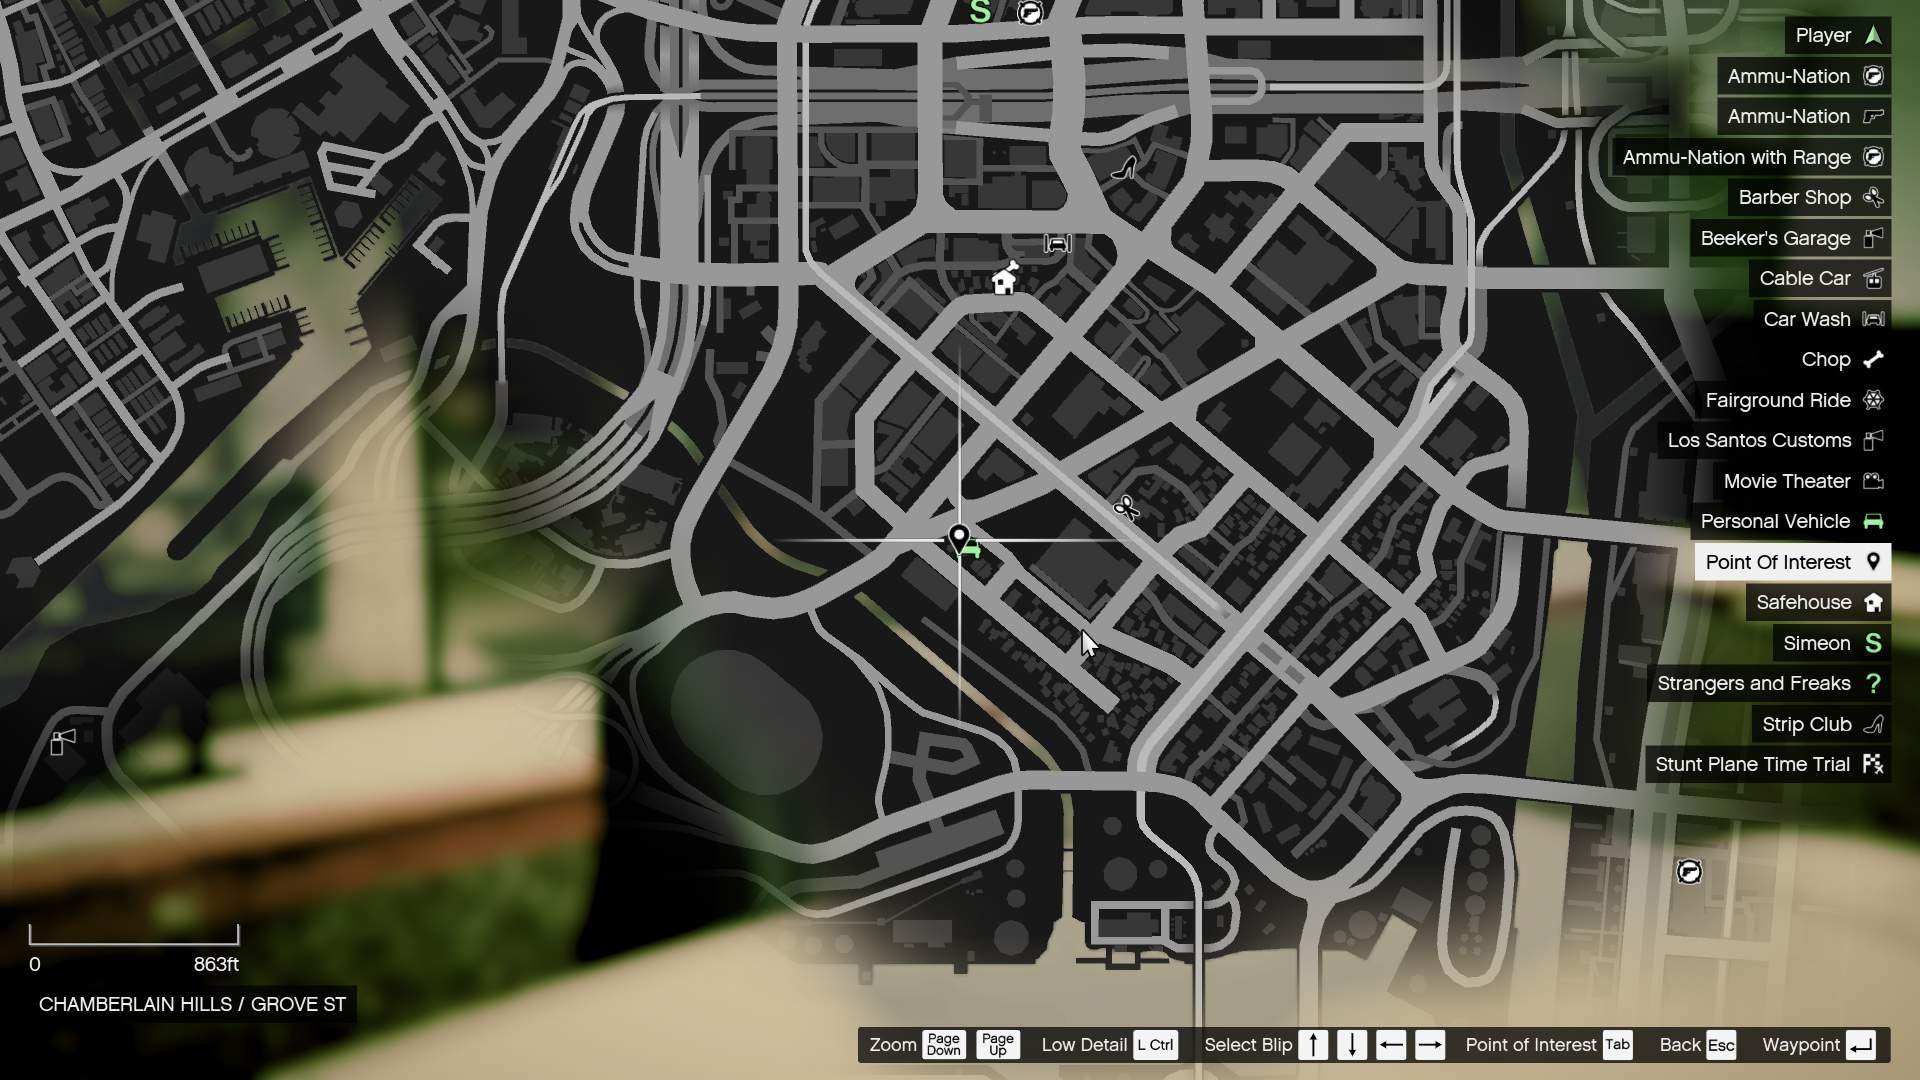 Banks in gta 5 that you can rob фото 96